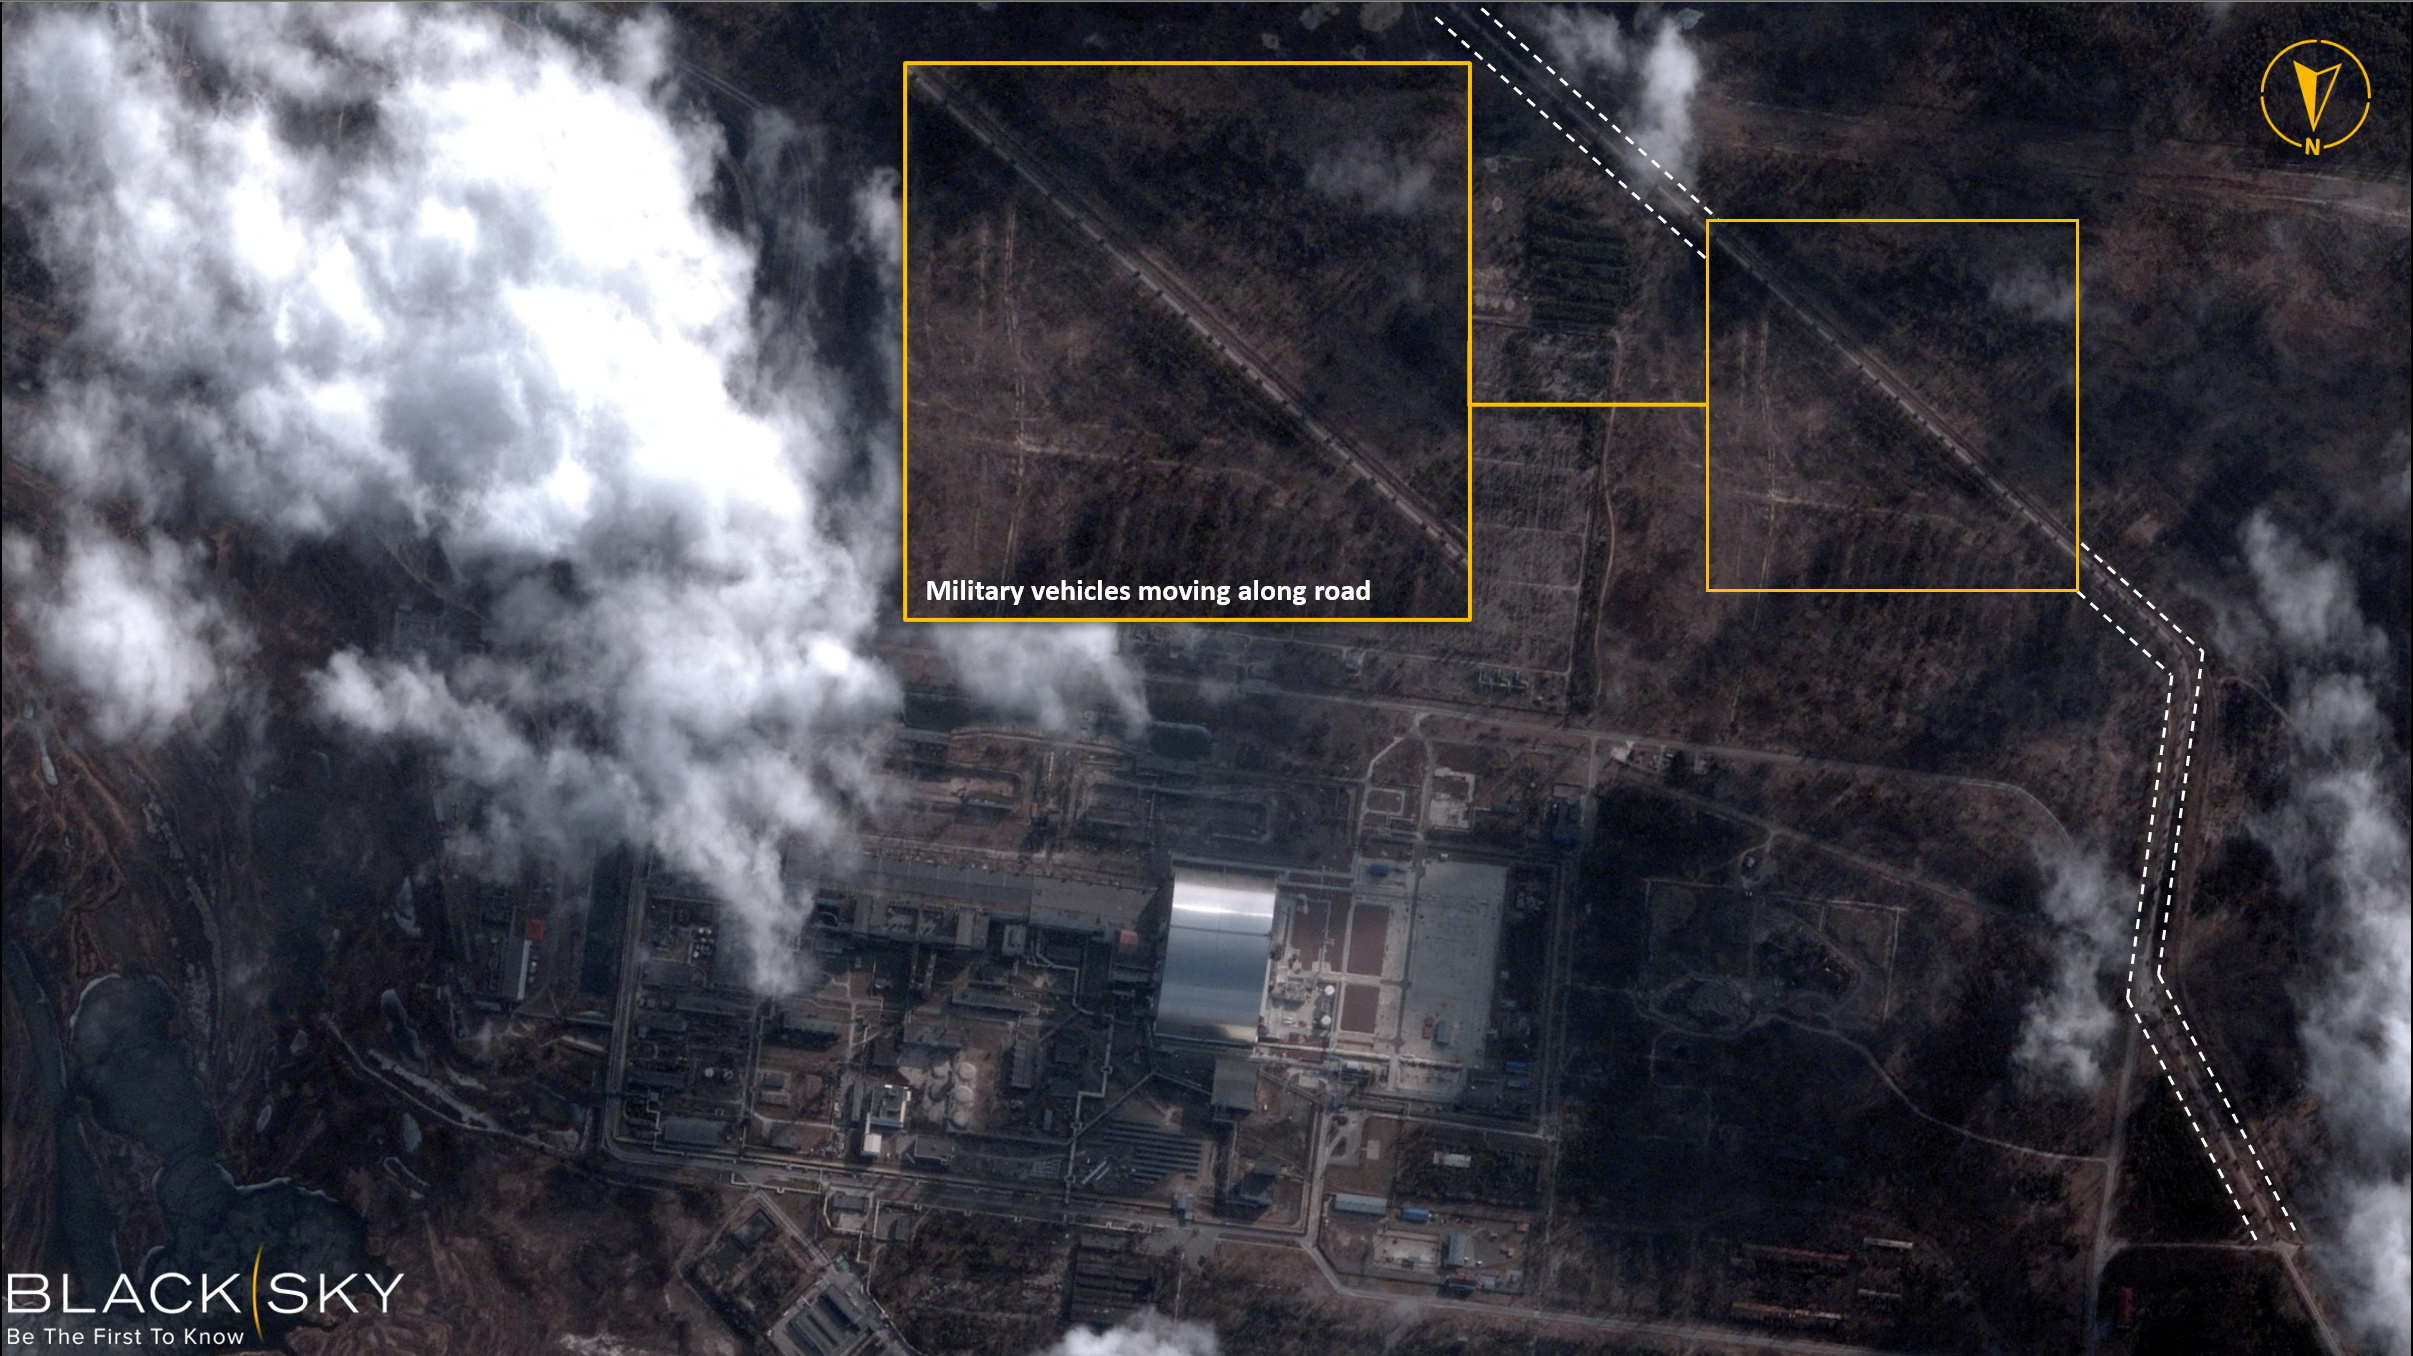 A satellite image with overlaid graphics shows military vehicles alongside Chernobyl Nuclear Power Plant, in Chernobyl, Ukraine February 25, 2022. Picture taken February 25, 2022. BlackSky/Handout via REUTERS. ATTENTION EDITORS - THIS IMAGE HAS BEEN SUPPLIED BY A THIRD PARTY. NO RESALES. NO ARCHIVES. MANDATORY CREDIT. REFILE - CORRECTING DATE